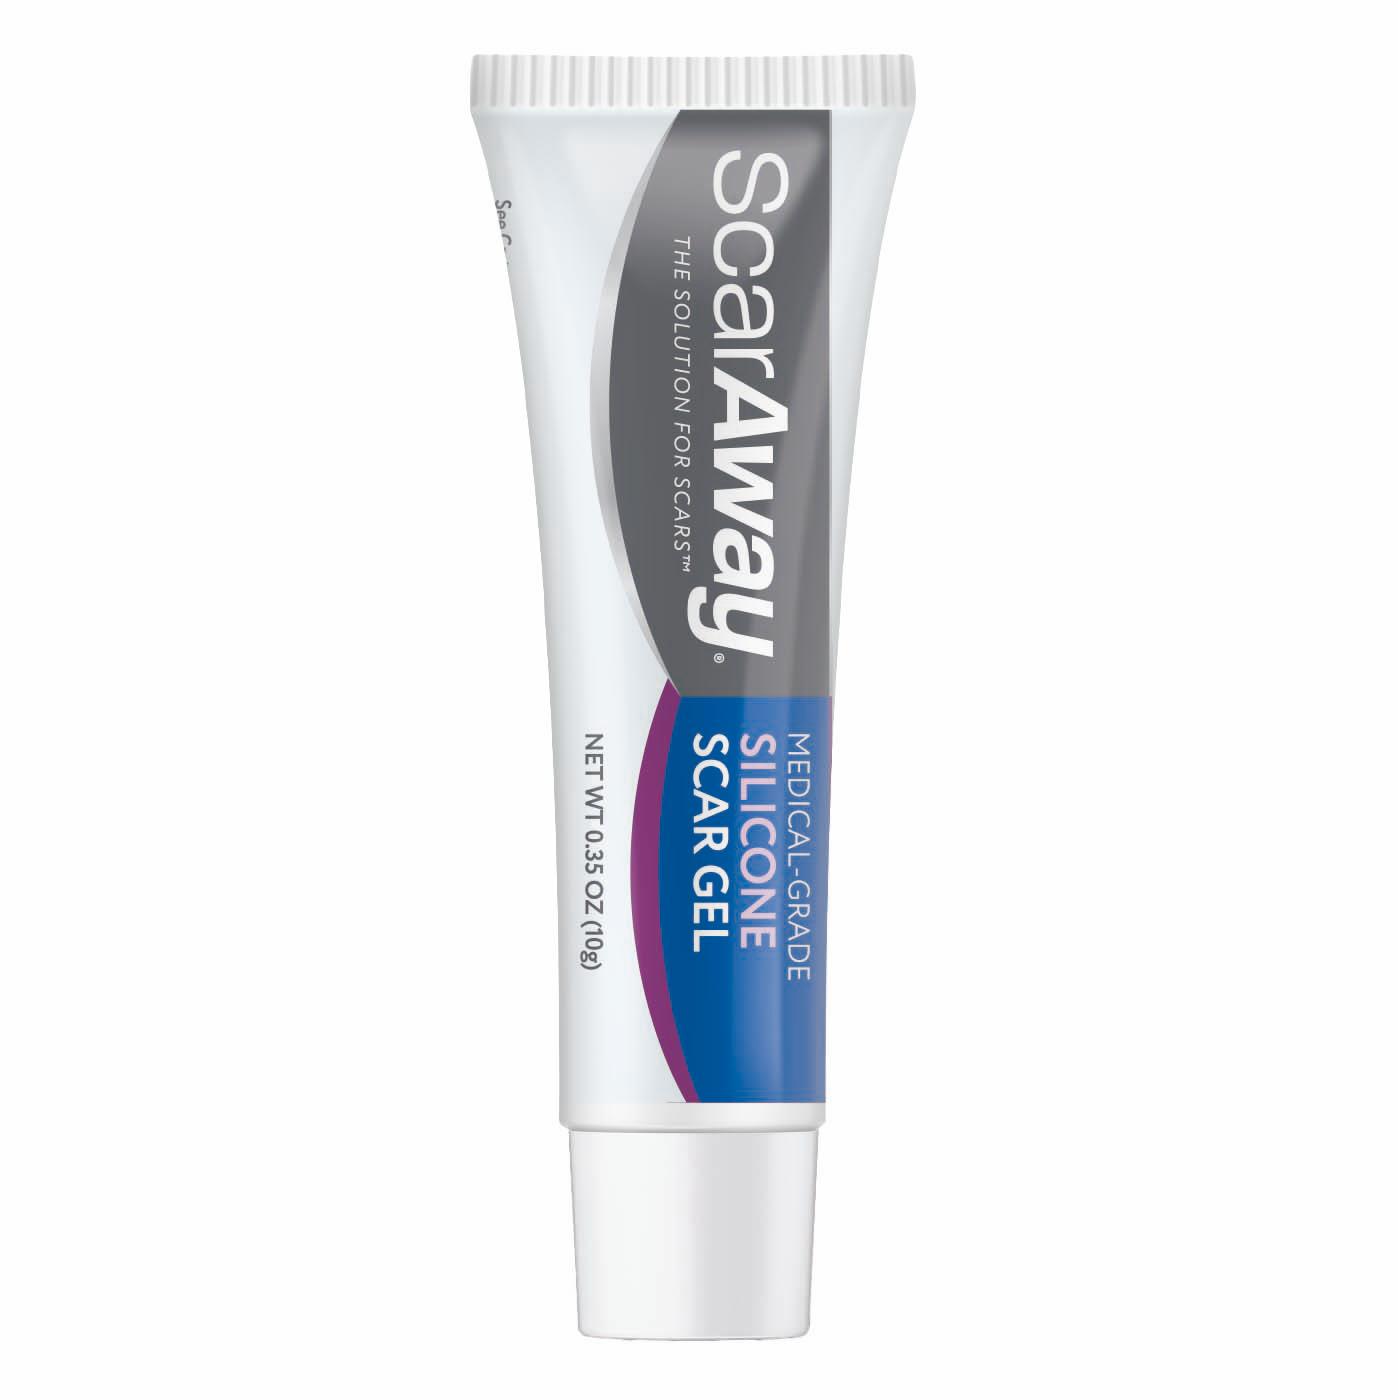 ScarAway Silicone Scar Gel; image 5 of 7